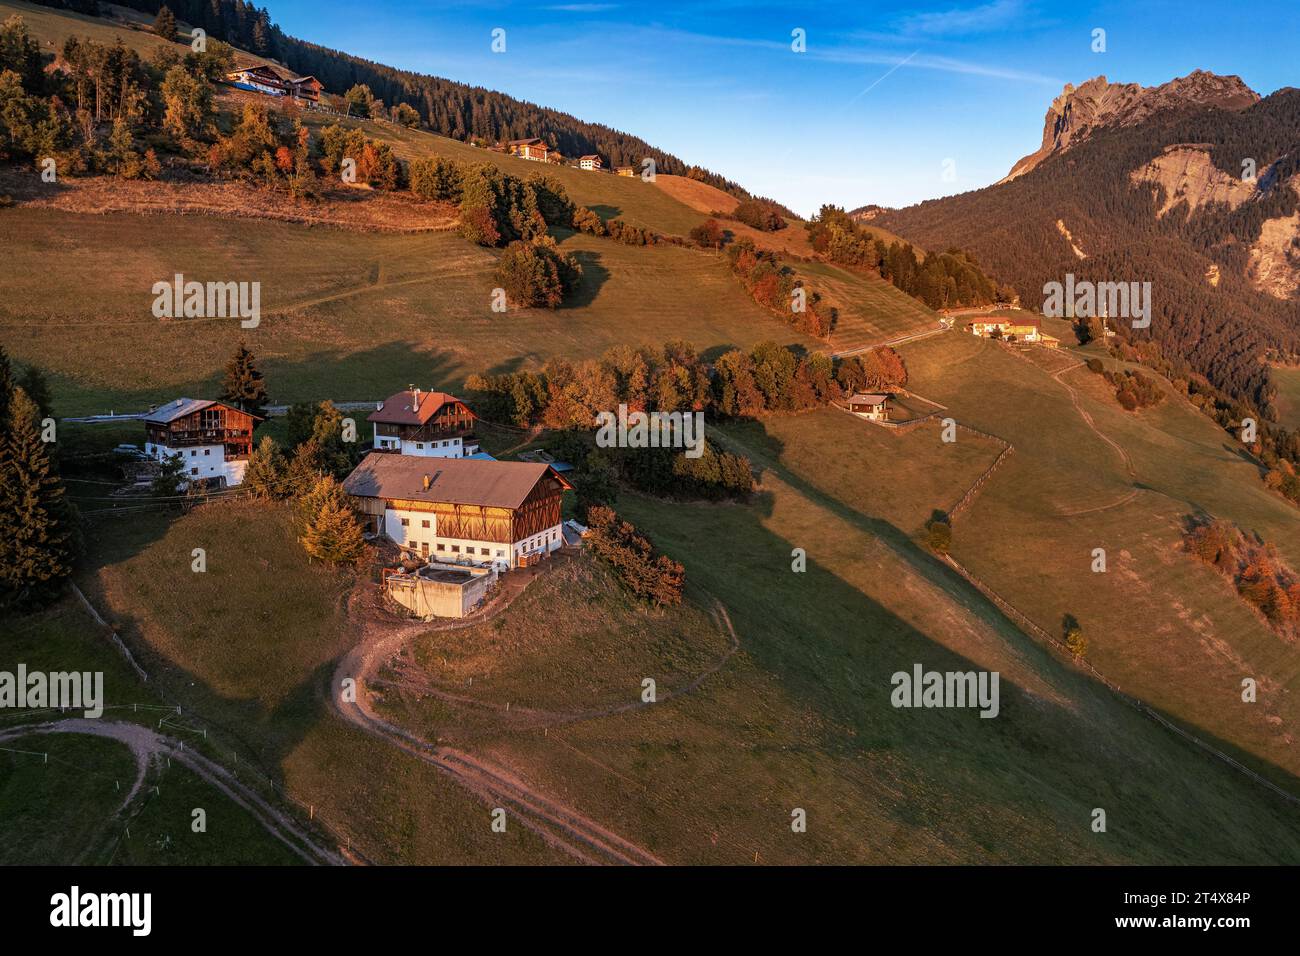 Santa Maddalena, Italy - Aerial panoramic view of Santa Maddalena village at sunset. Autumn scenery with traditional tyrolean houses, mountain peaks a Stock Photo